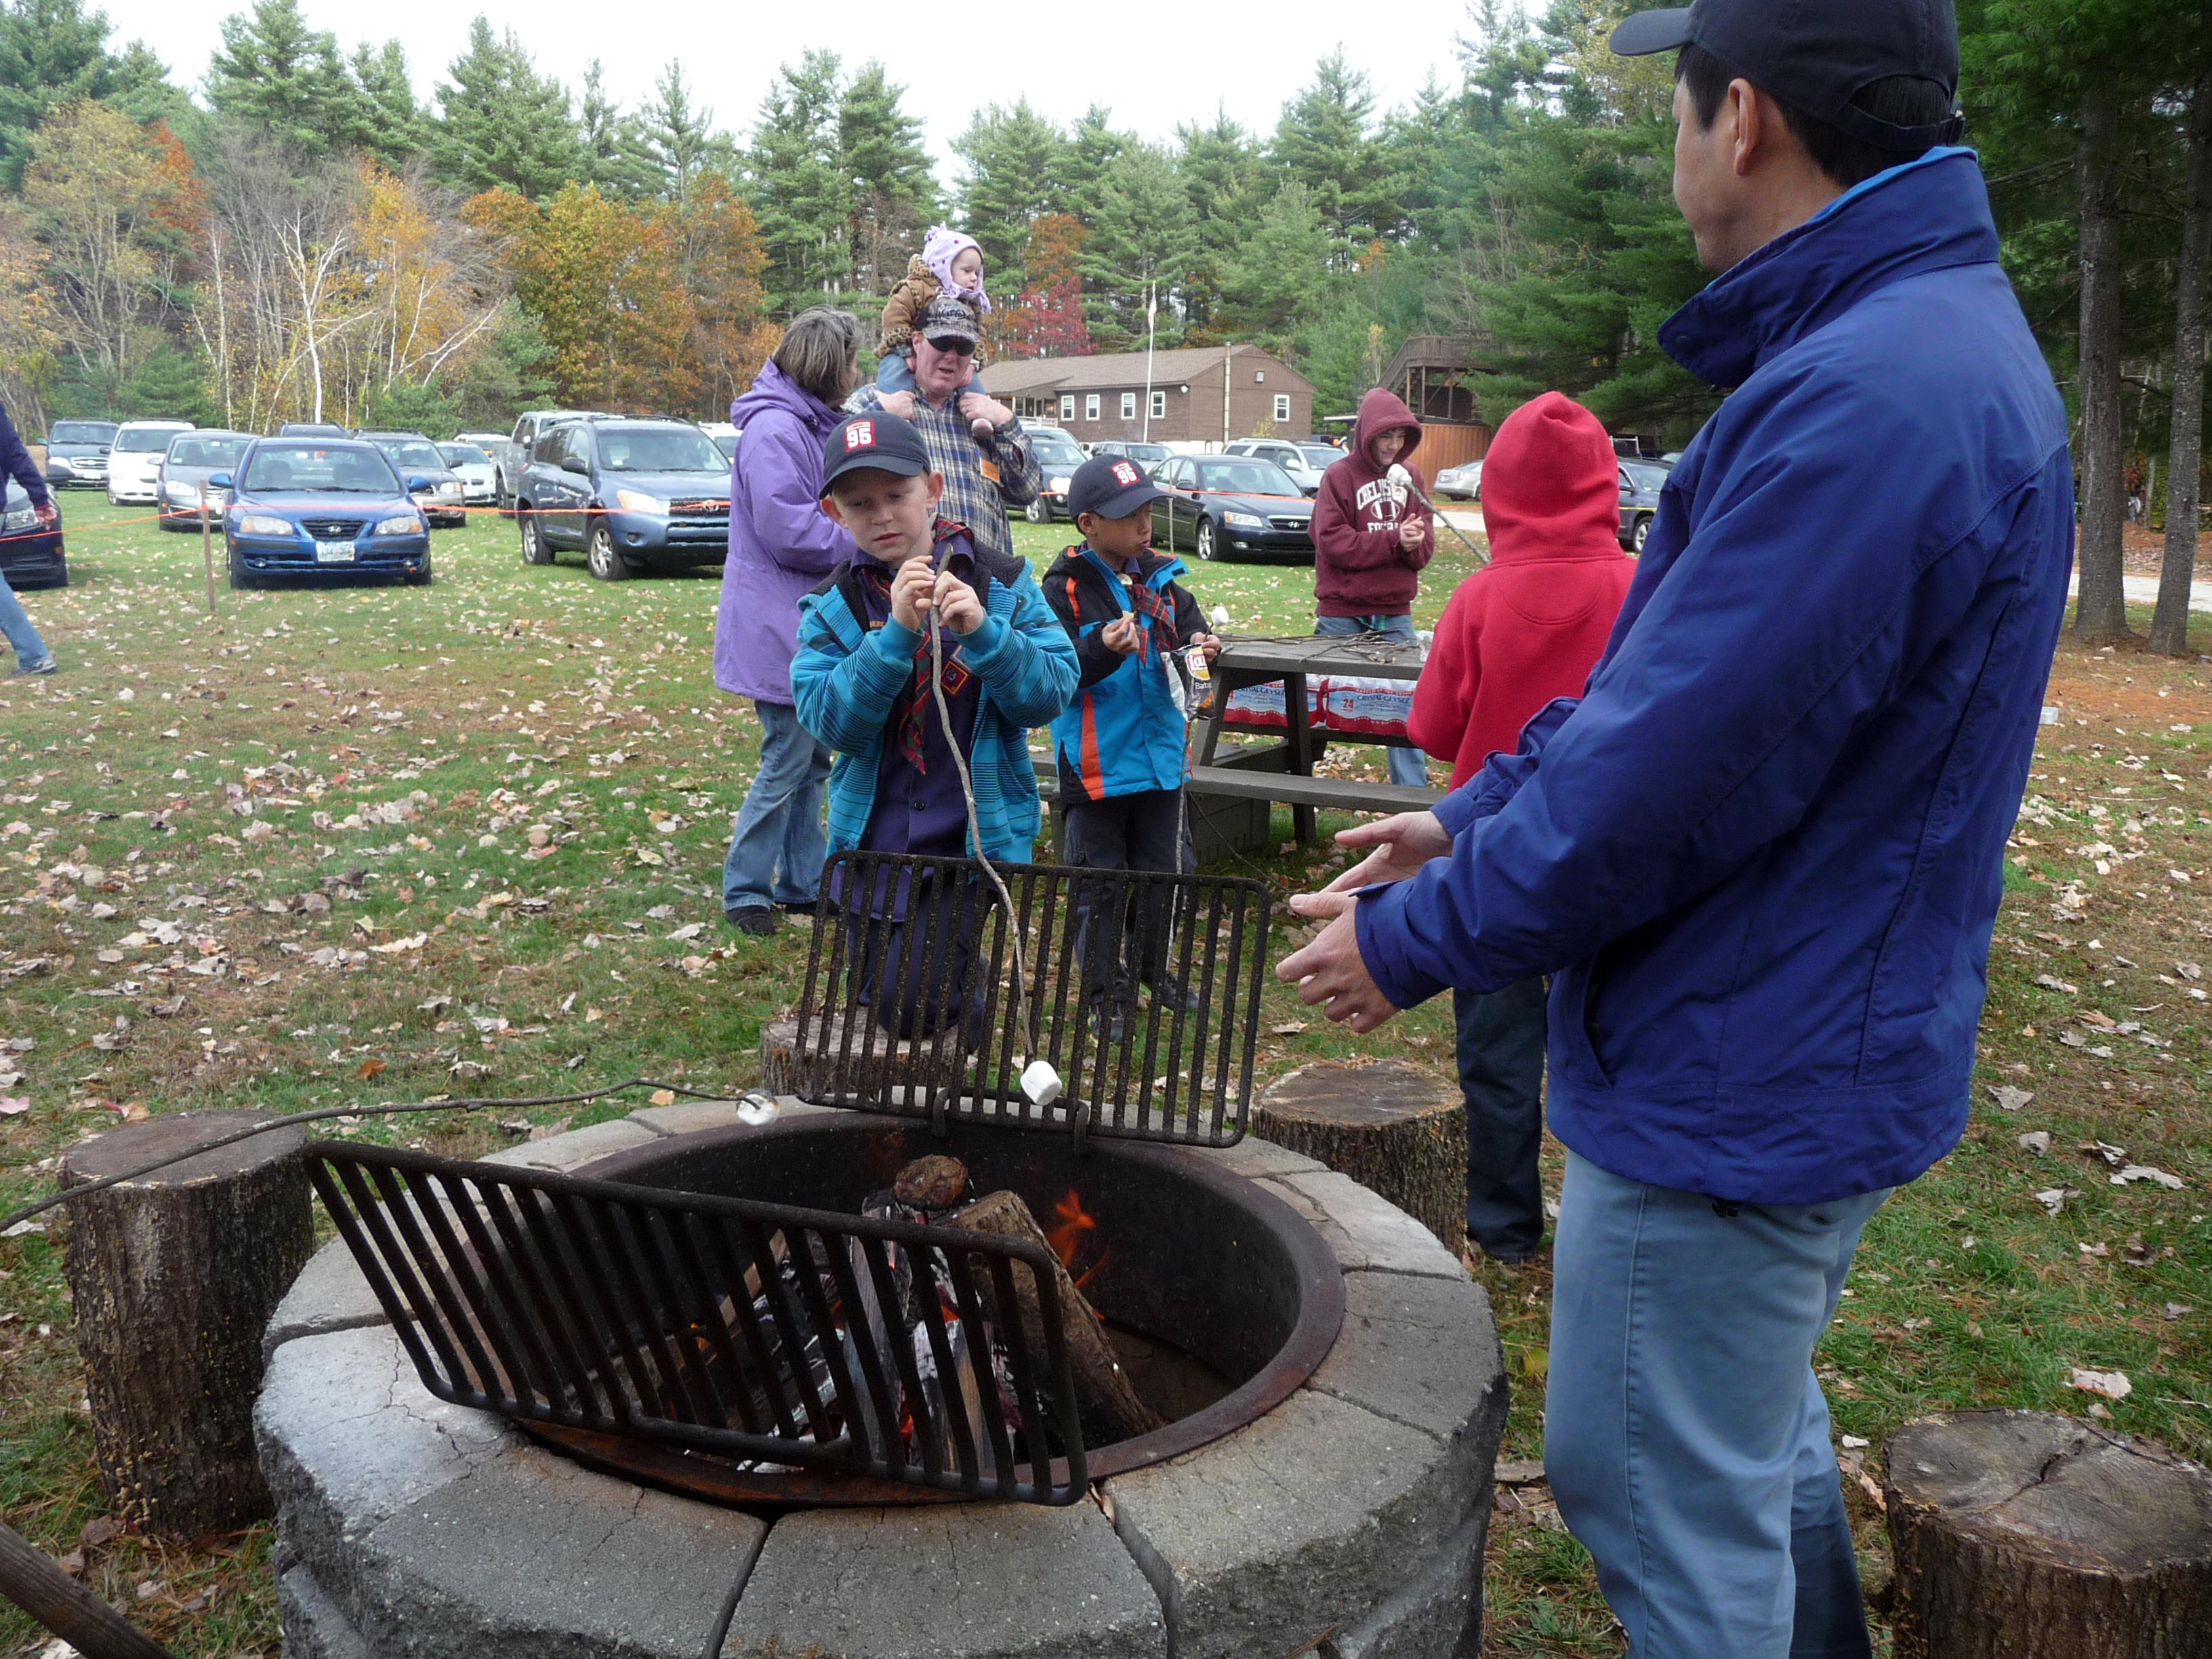 A boyscout tests the marshmallow pit